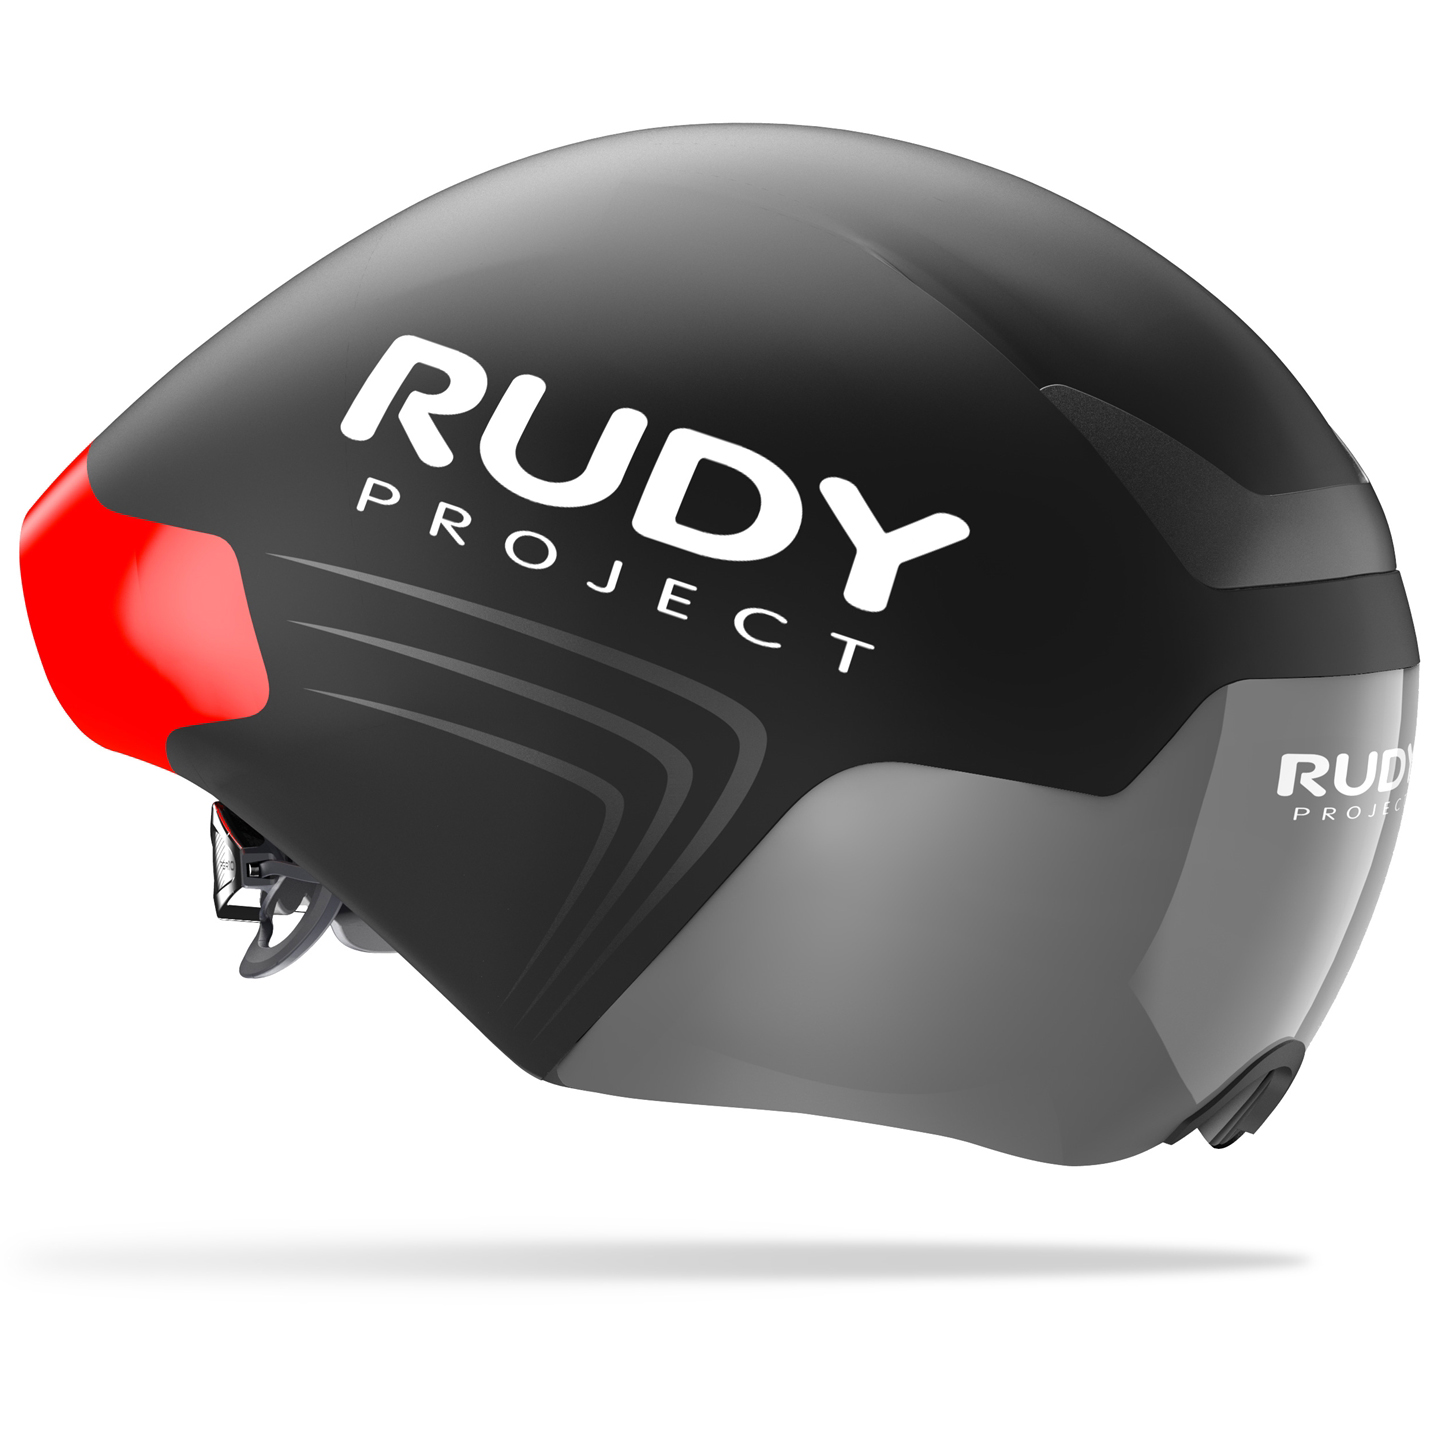 Productfoto van Rudy Project The Wing Helm - Black (Matte) HL730011